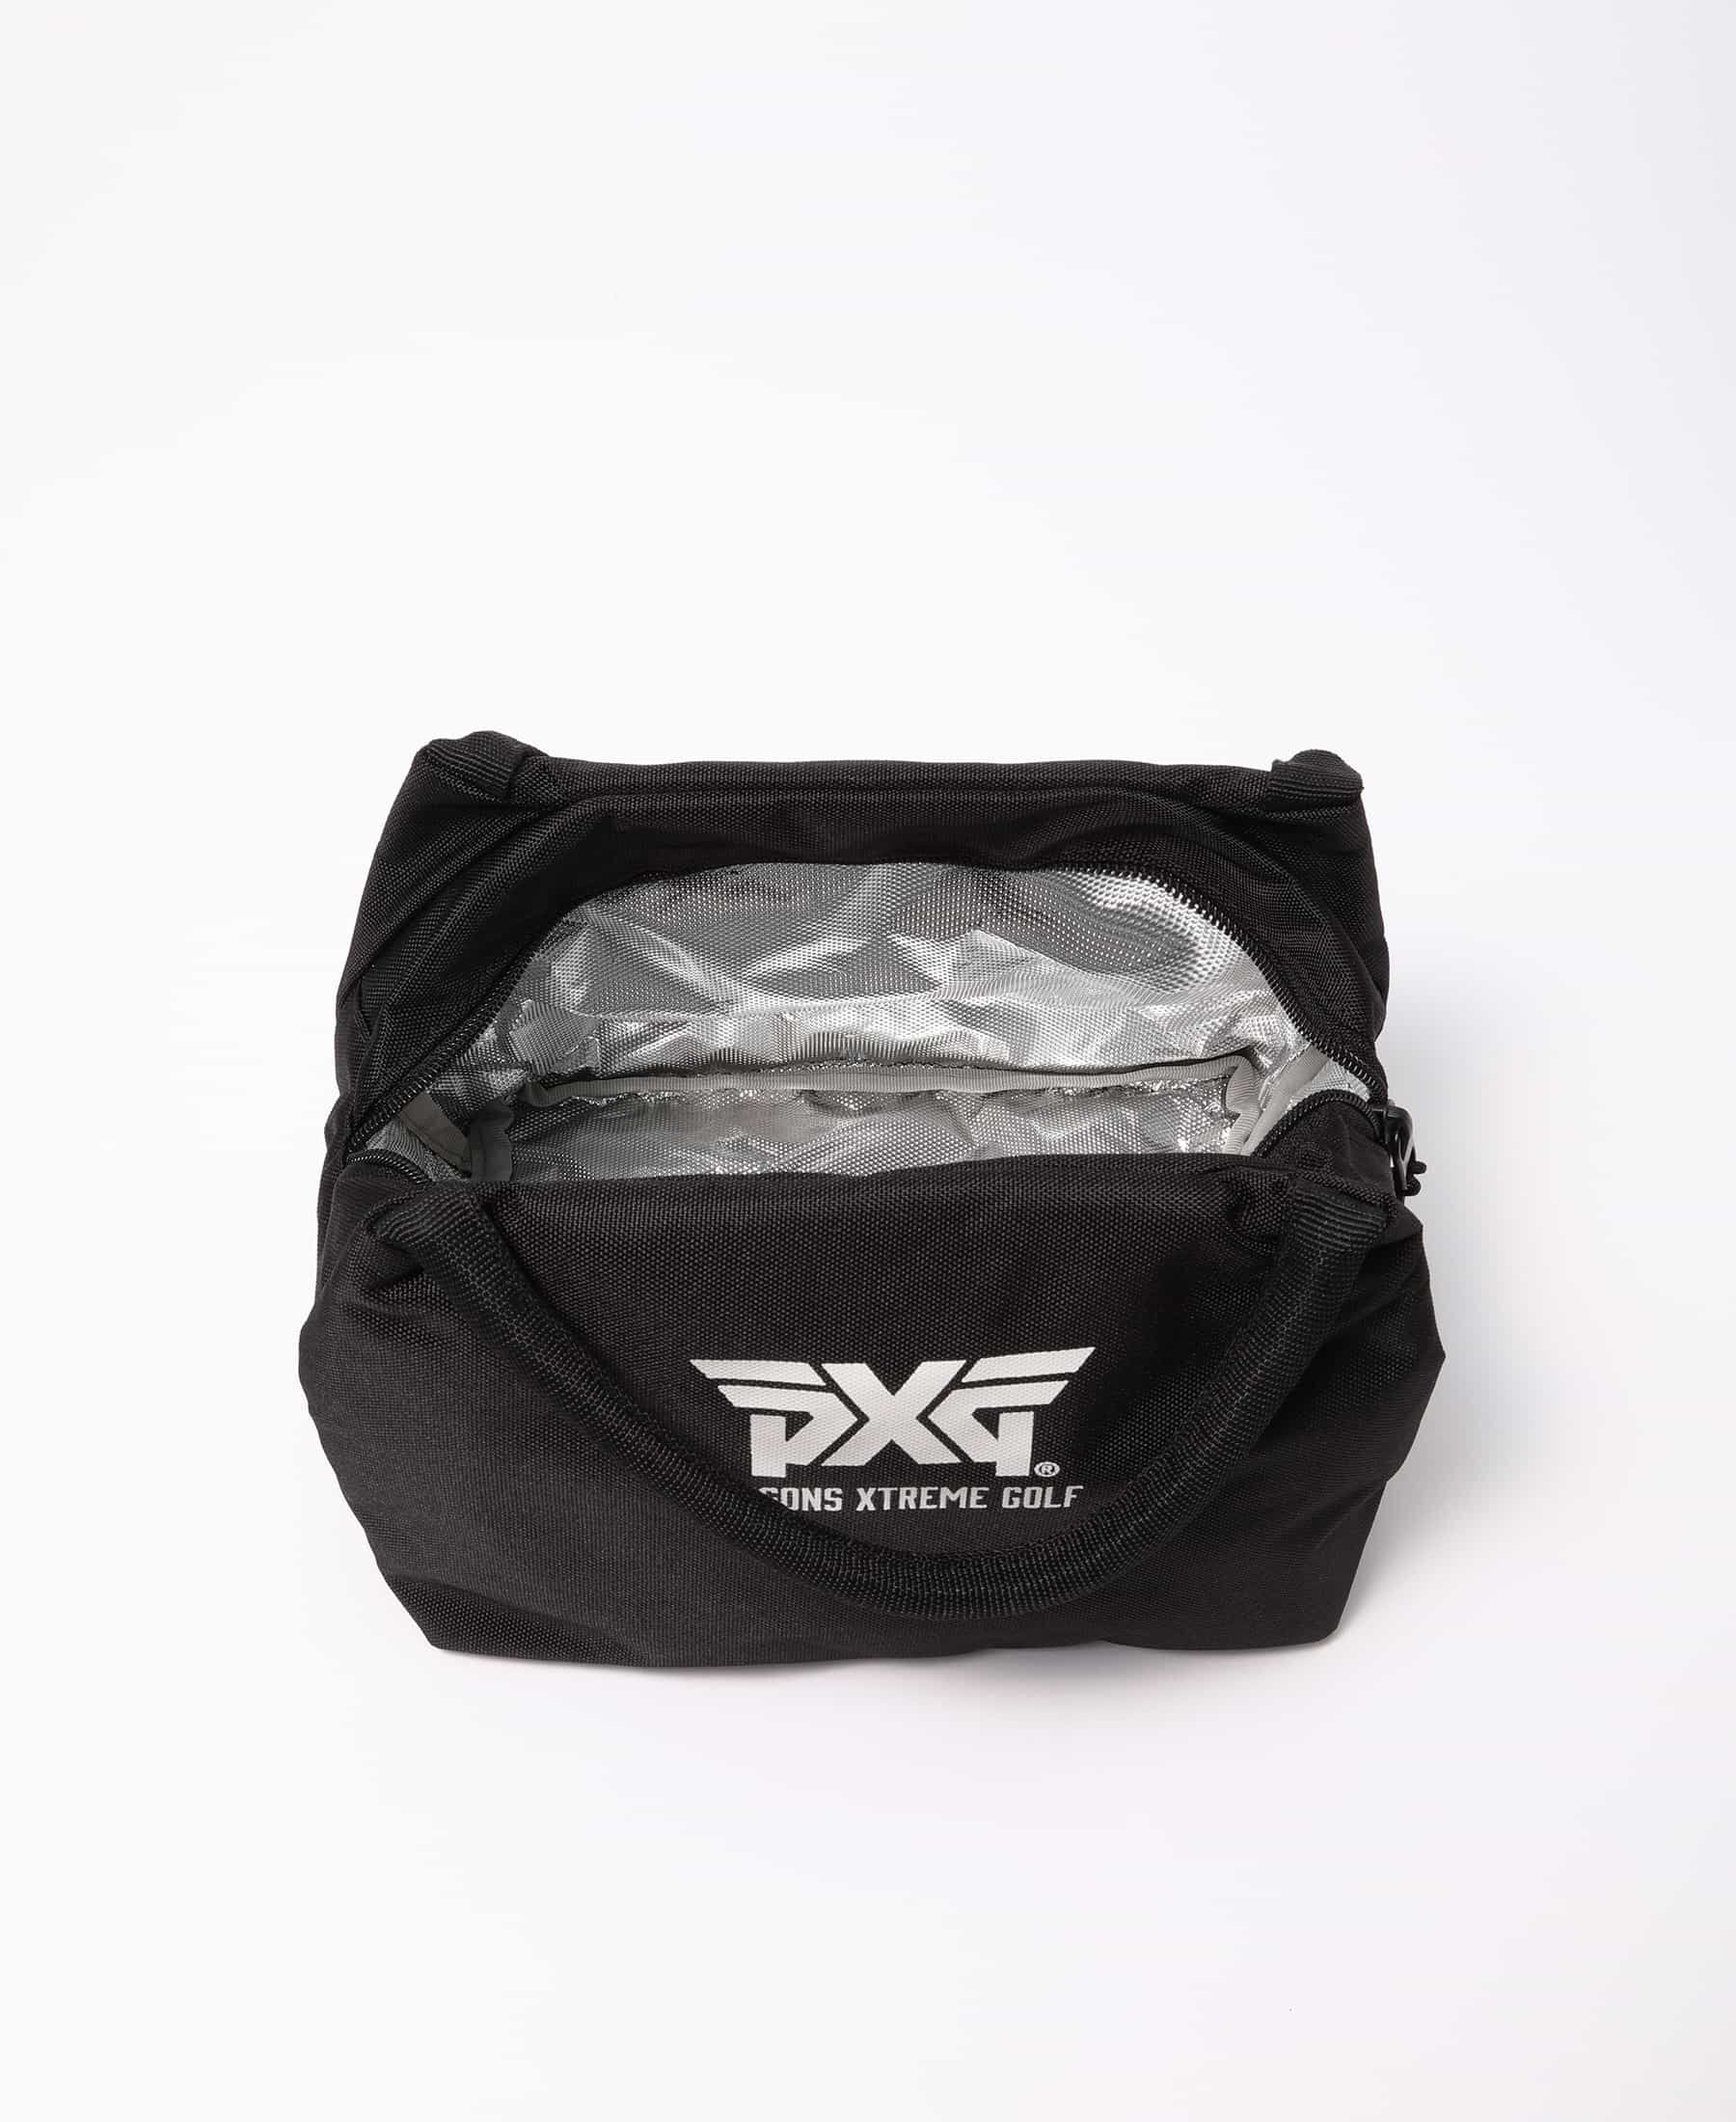 Shop PXG Accessories - Hats, Gloves, Ball Markers and More | PXG JP